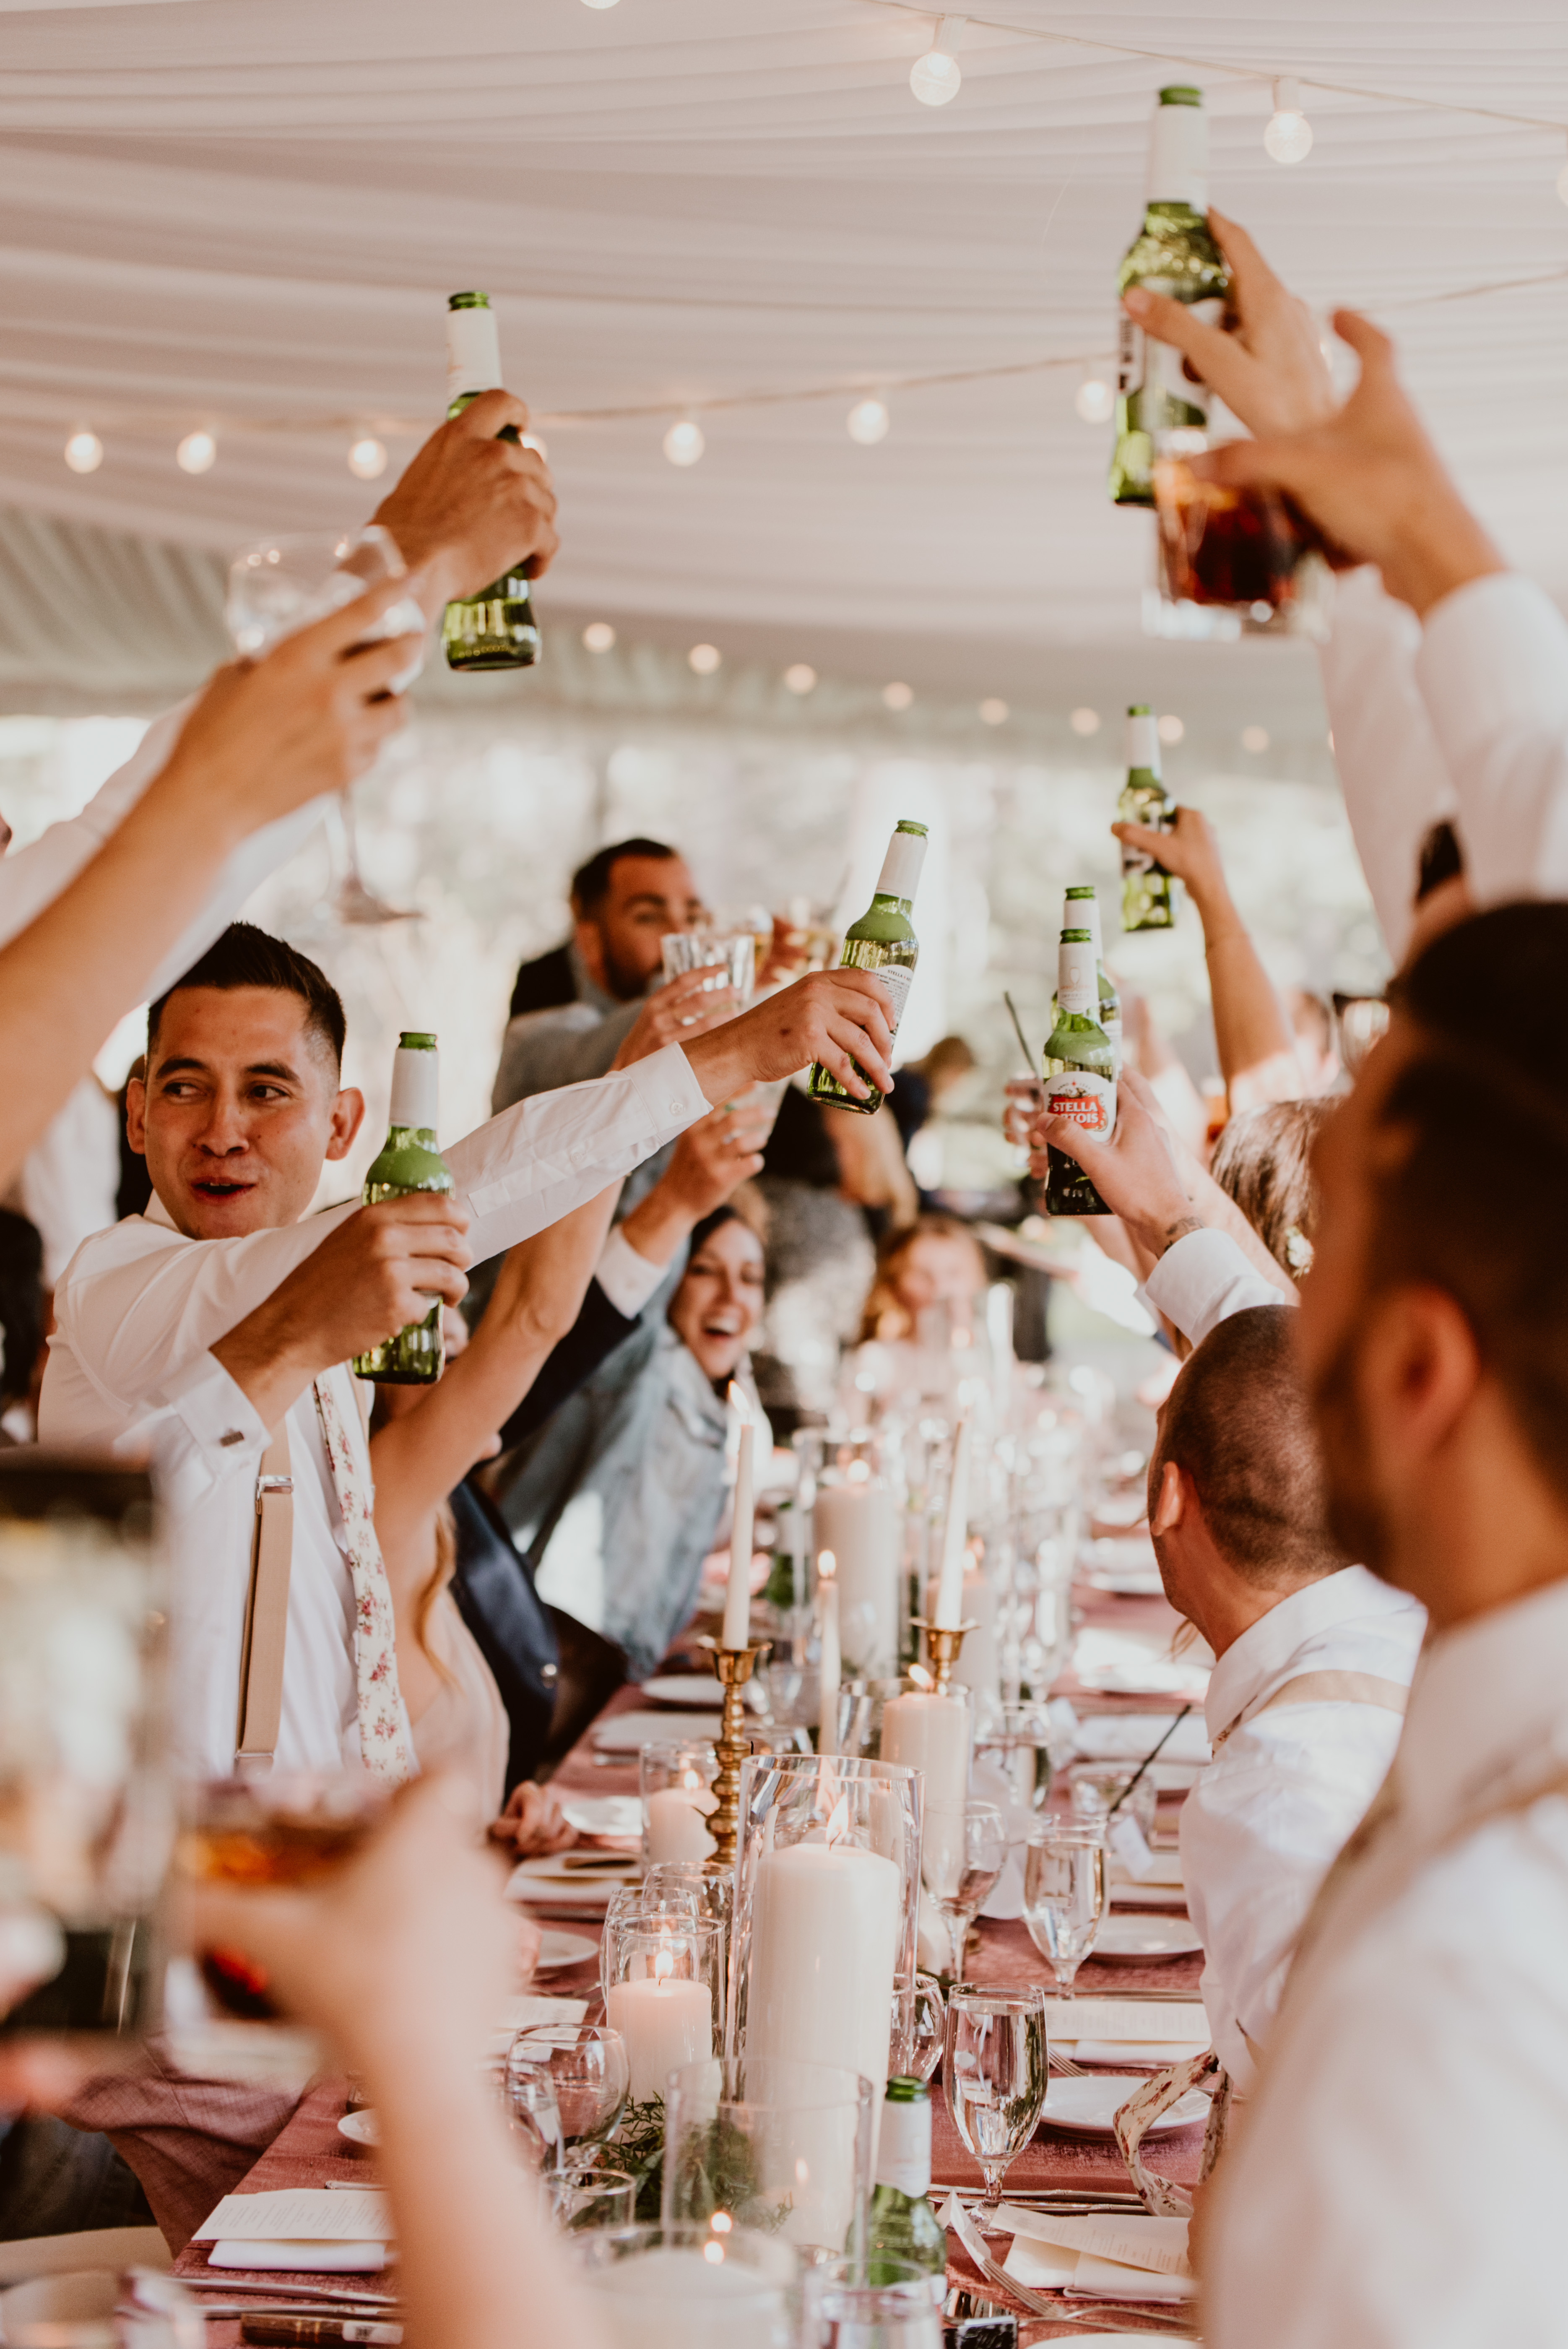 A dozen glasses are raised in a toast around a table at a wedding.